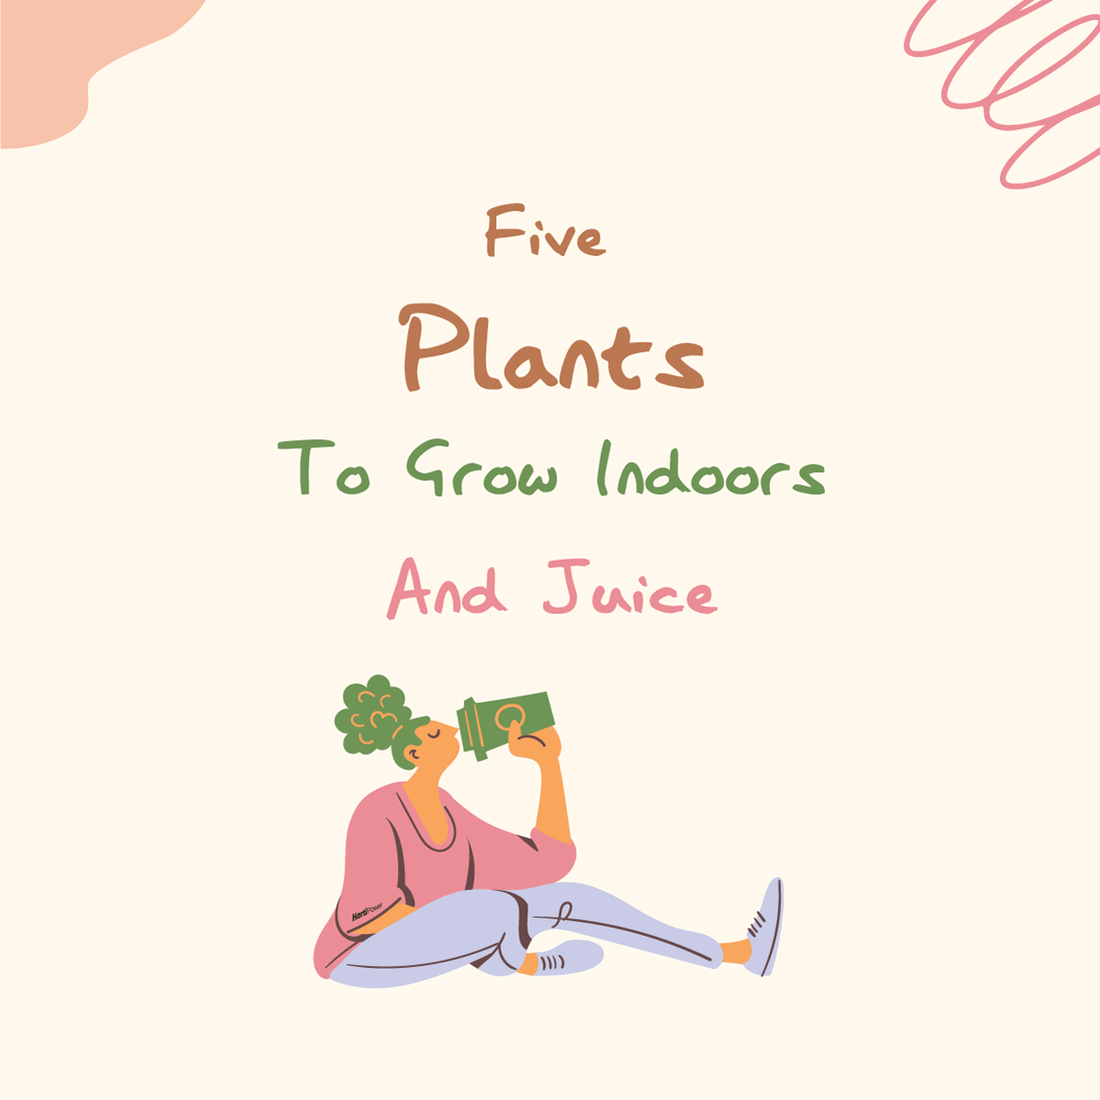 Five plants to grow indoors and juice